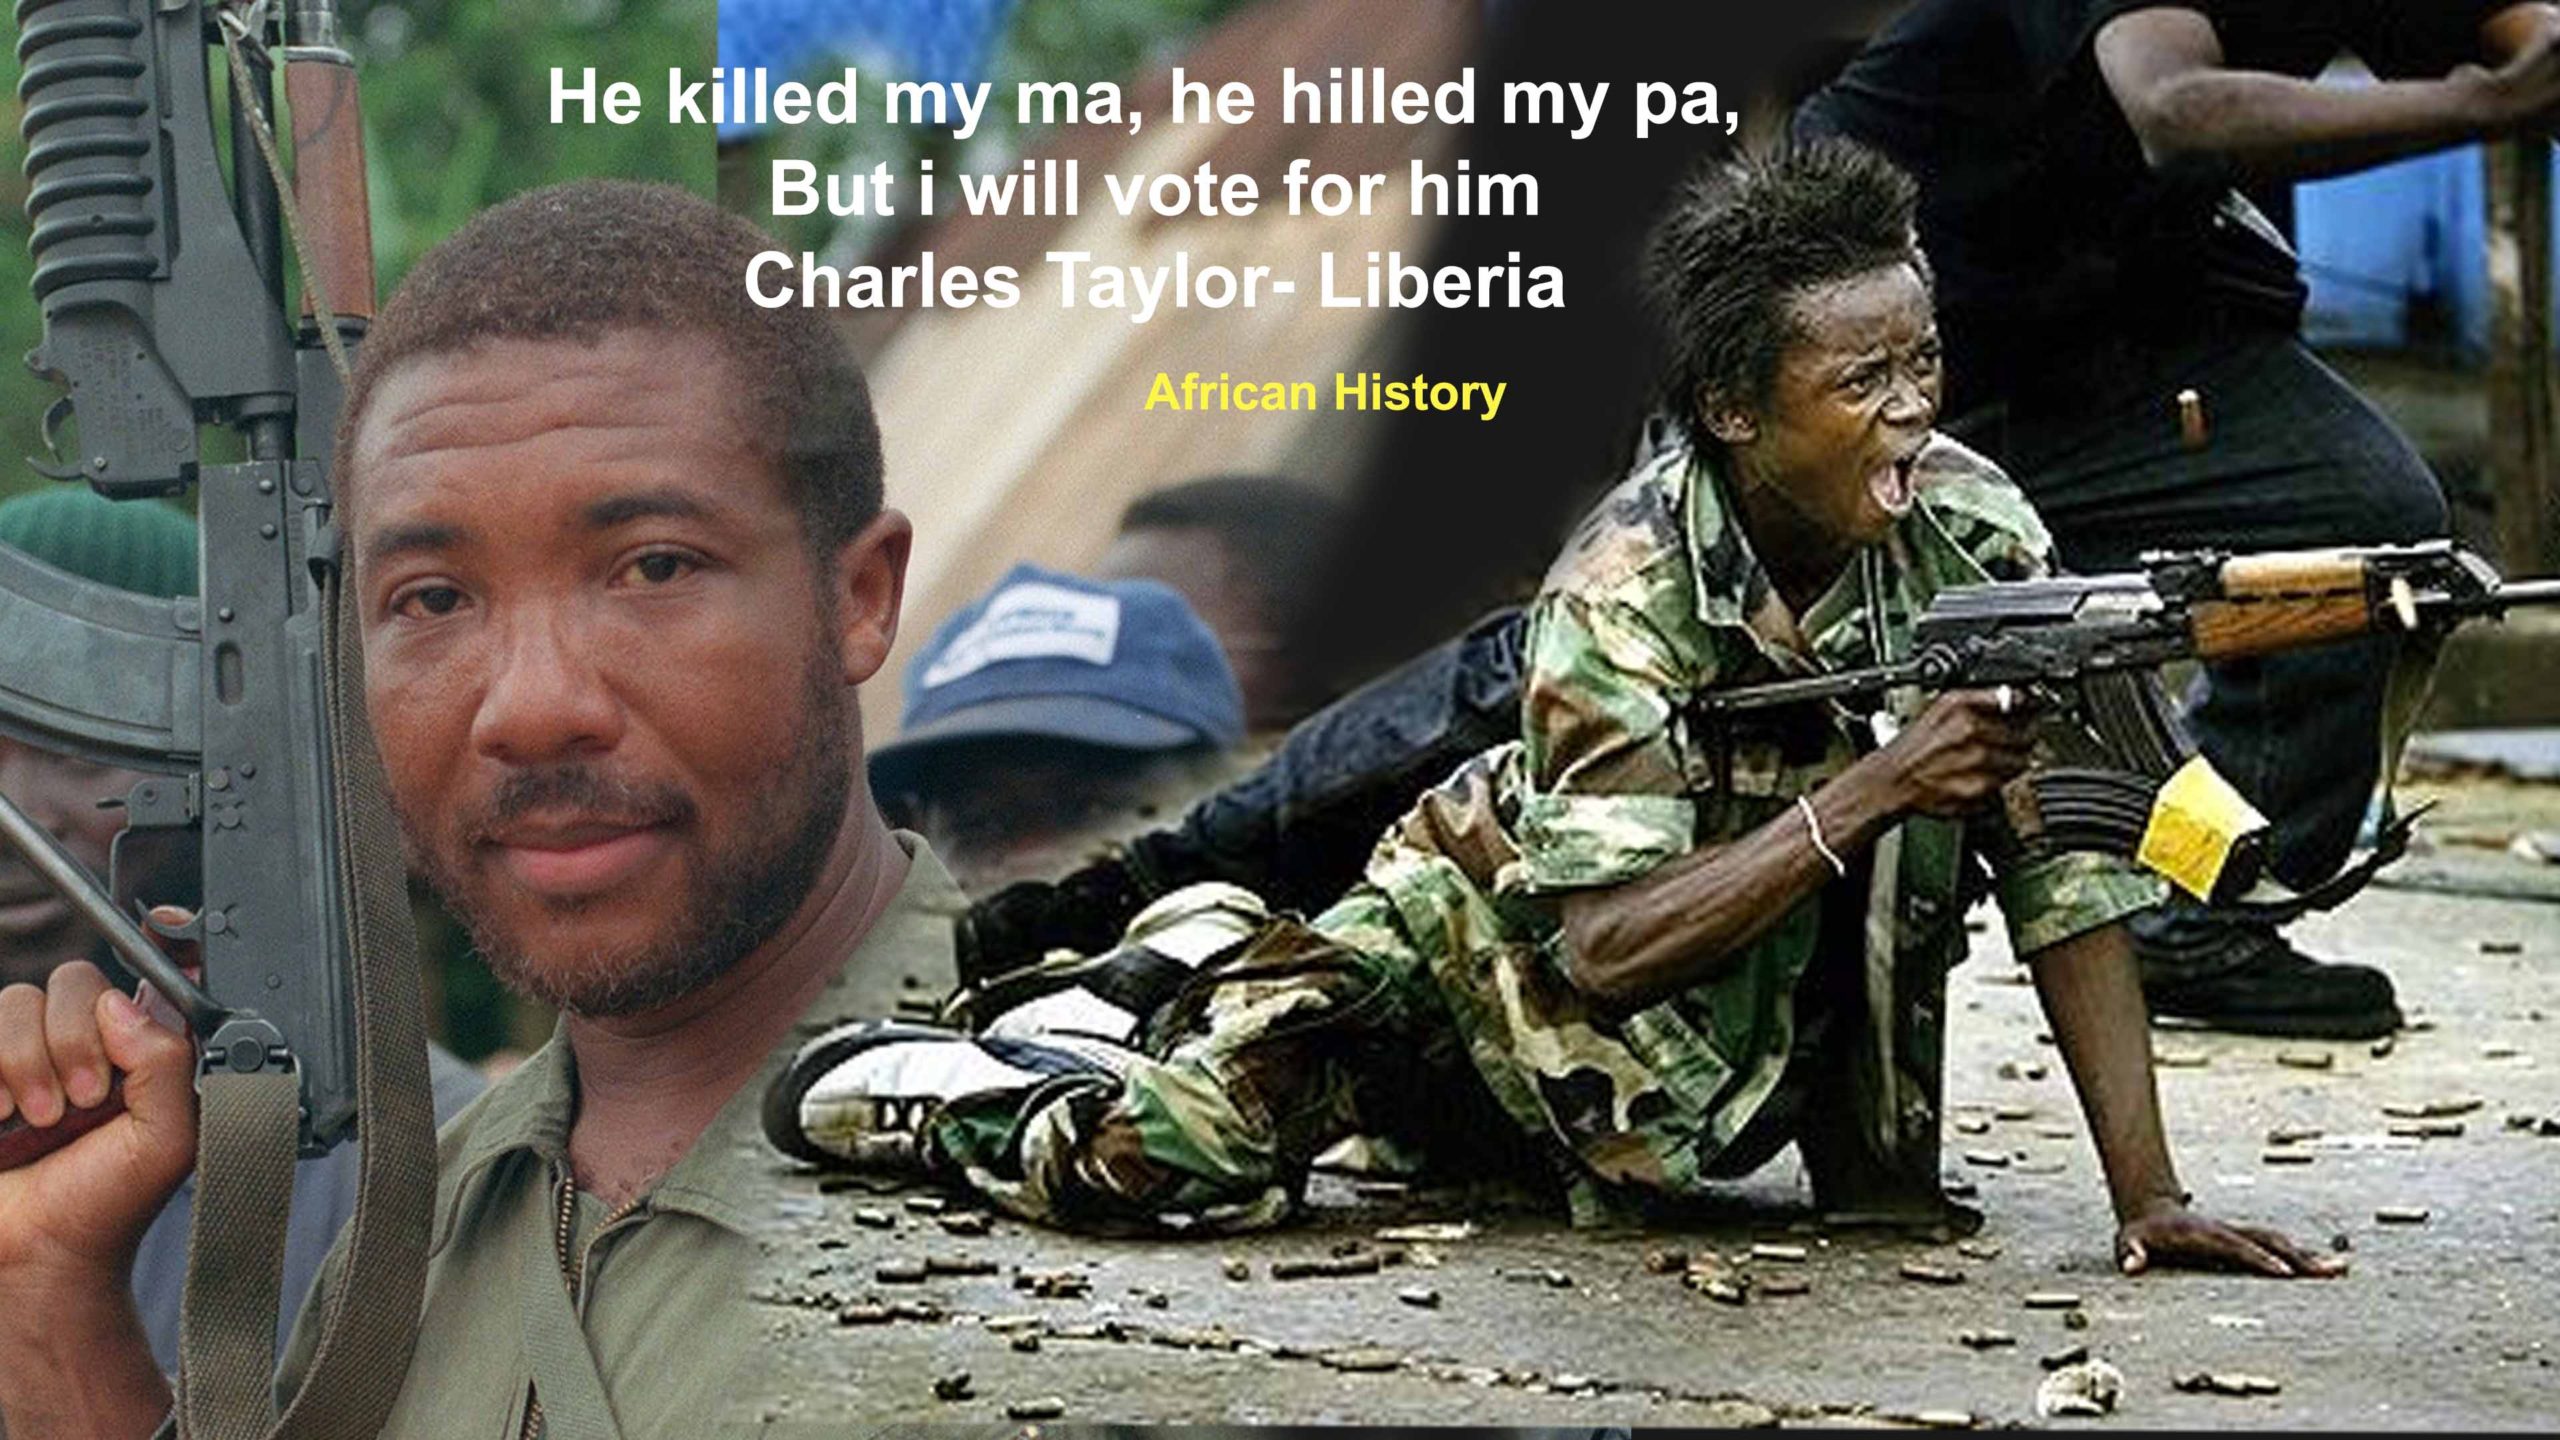 African History: He killed my ma, he killed my pa, But i will vote for him. Charles Taylor- Liberia AdvertAfrica News on afronewswire.com: Amplifying Africa's Voice | afronewswire.com | Breaking News & Stories